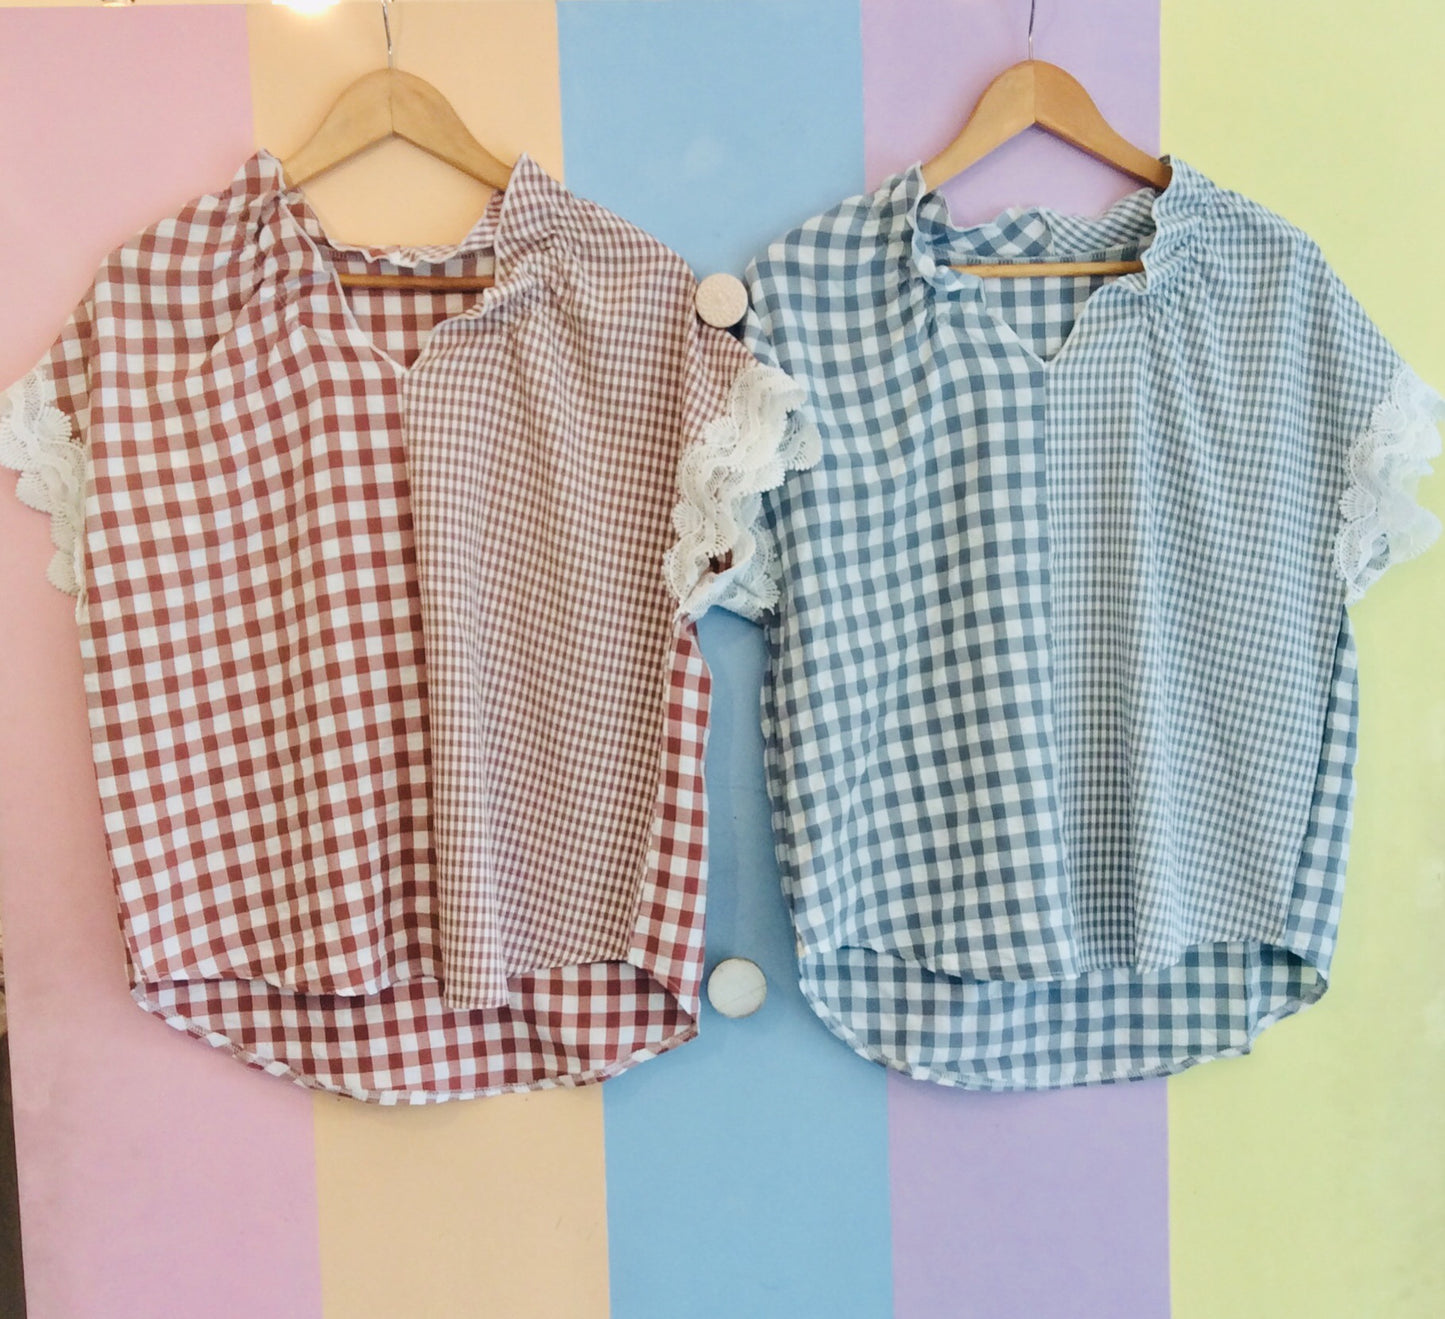 Medium & Small Gingham Square Blouse w/ Lacy Sleeve